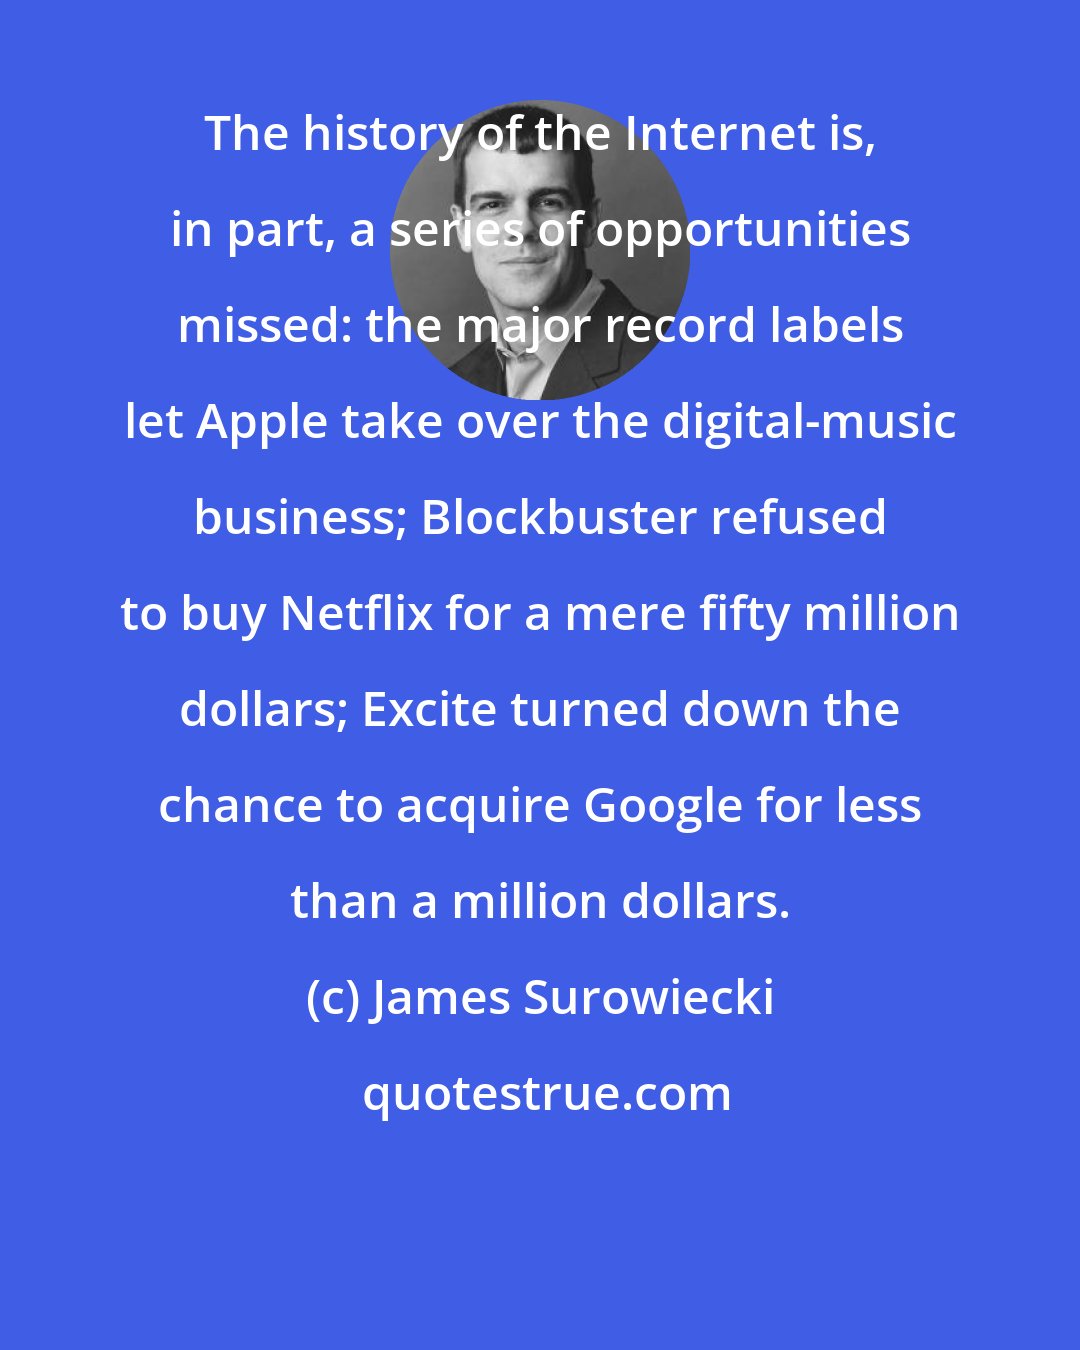 James Surowiecki: The history of the Internet is, in part, a series of opportunities missed: the major record labels let Apple take over the digital-music business; Blockbuster refused to buy Netflix for a mere fifty million dollars; Excite turned down the chance to acquire Google for less than a million dollars.